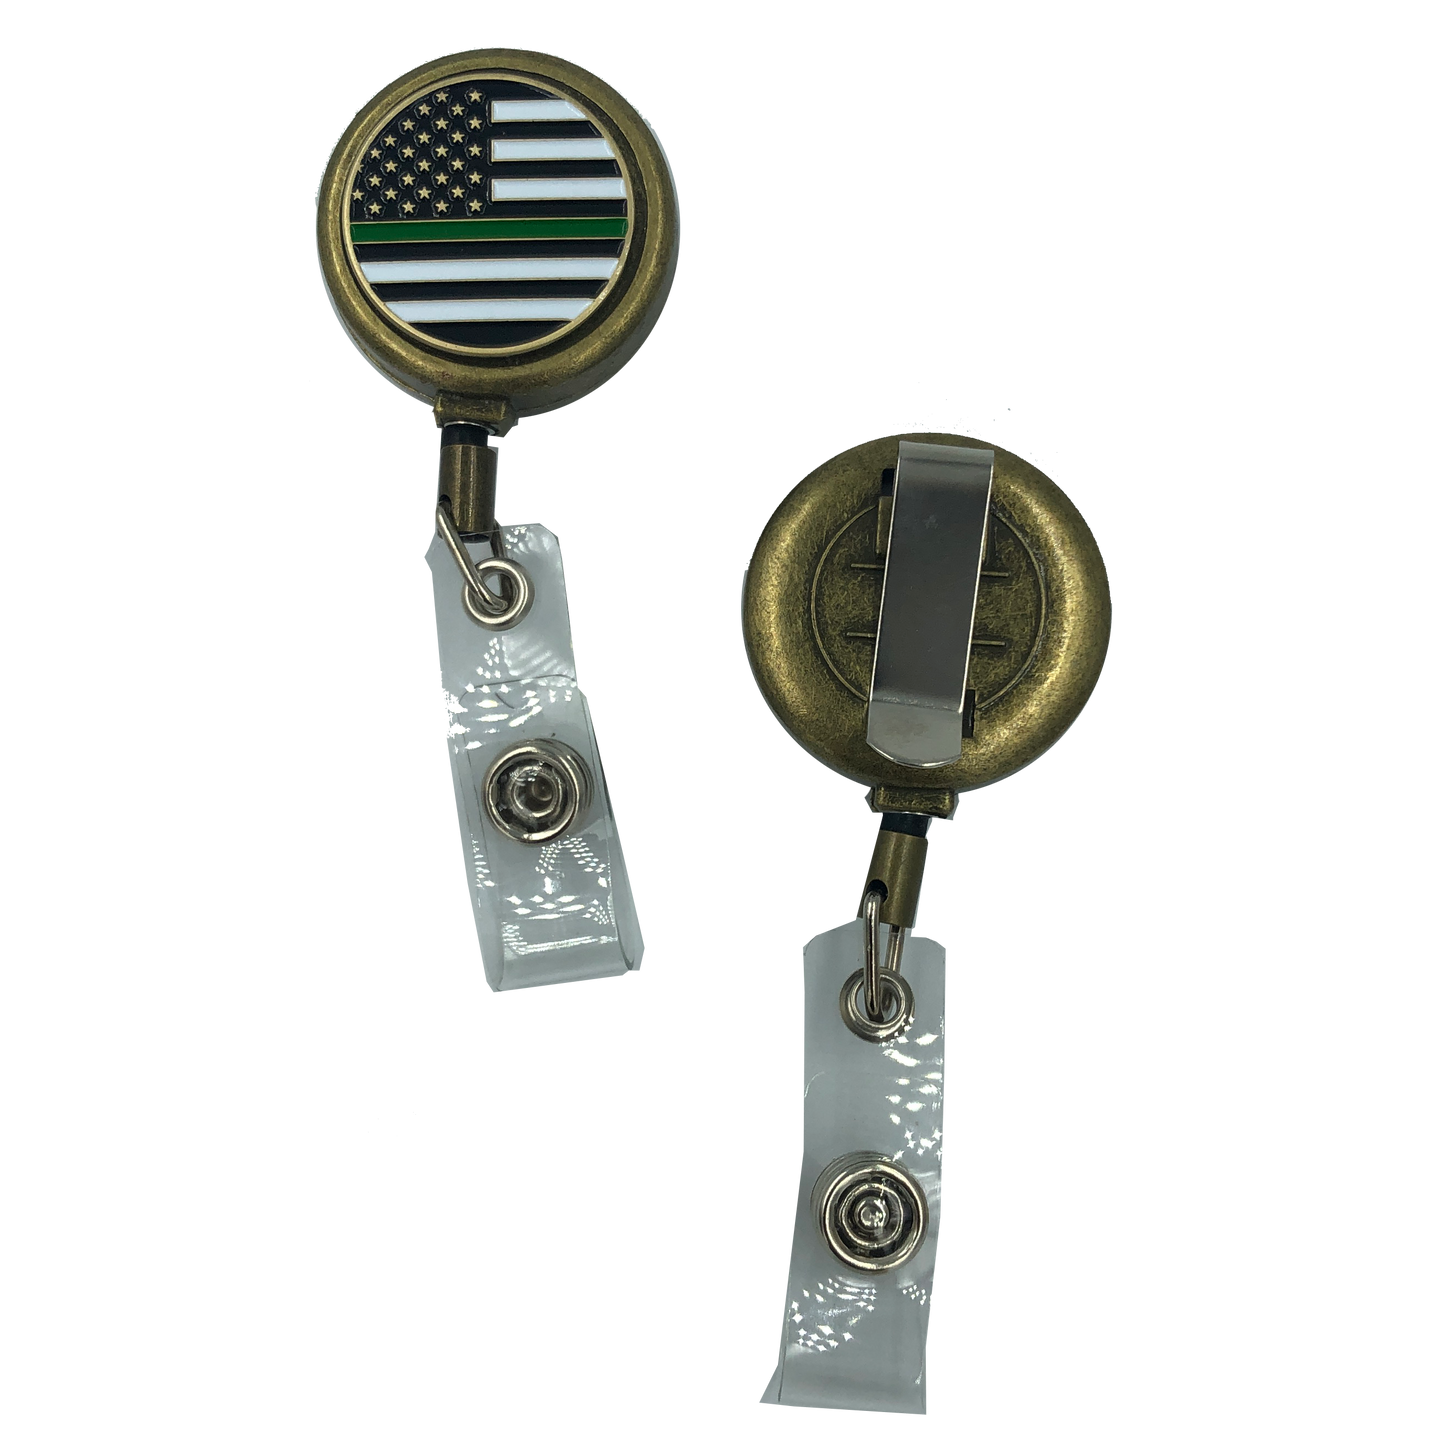 CL8-10 Thin Green Line Metal ID Reel retractable ID Card Holder CBP Border Patrol Sheriff Army security